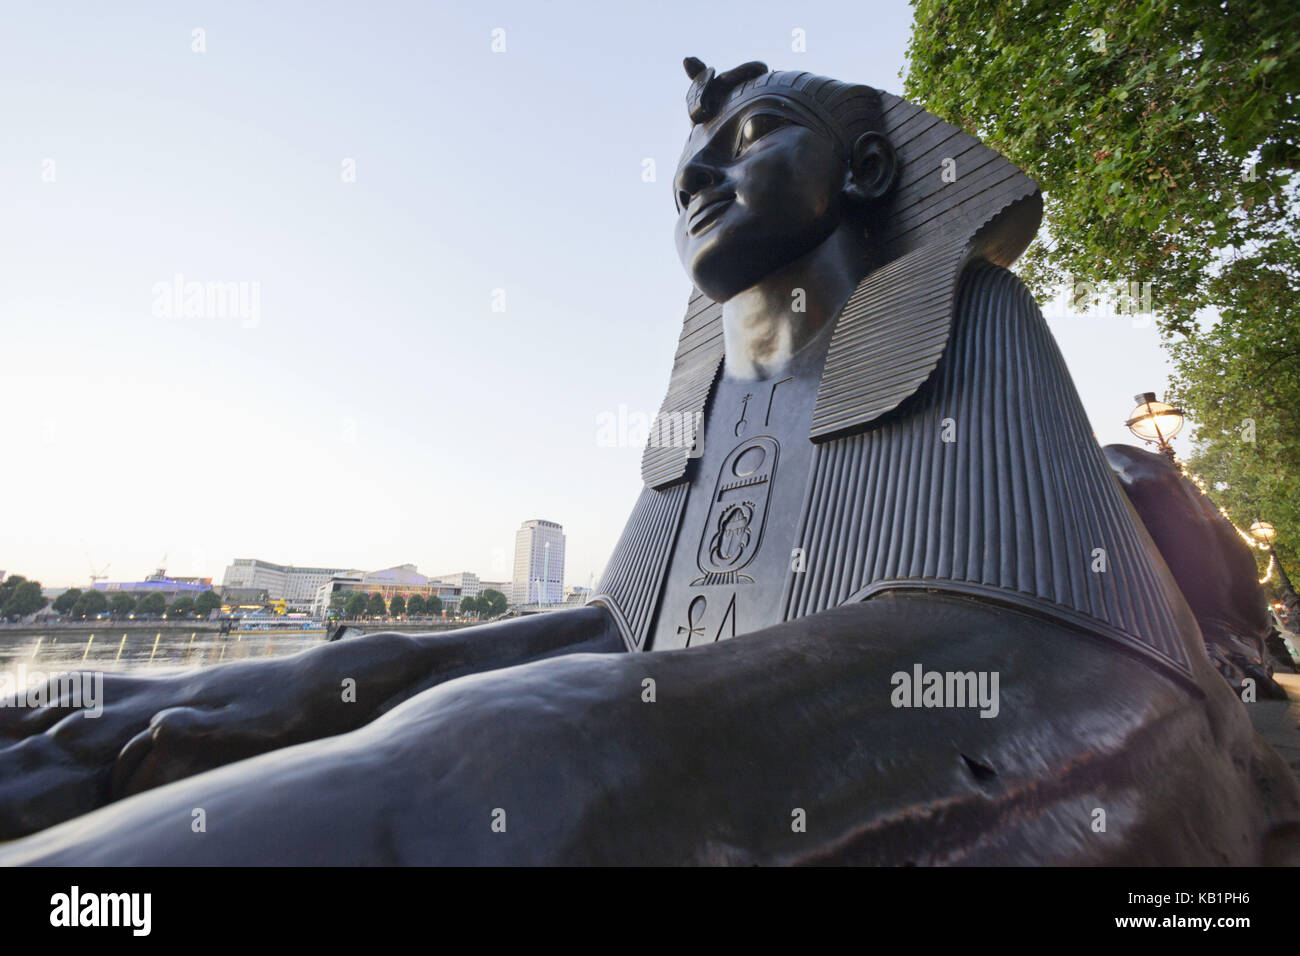 England, London, Victoria rampart, sphinx statue on the bank of River Thames, Stock Photo